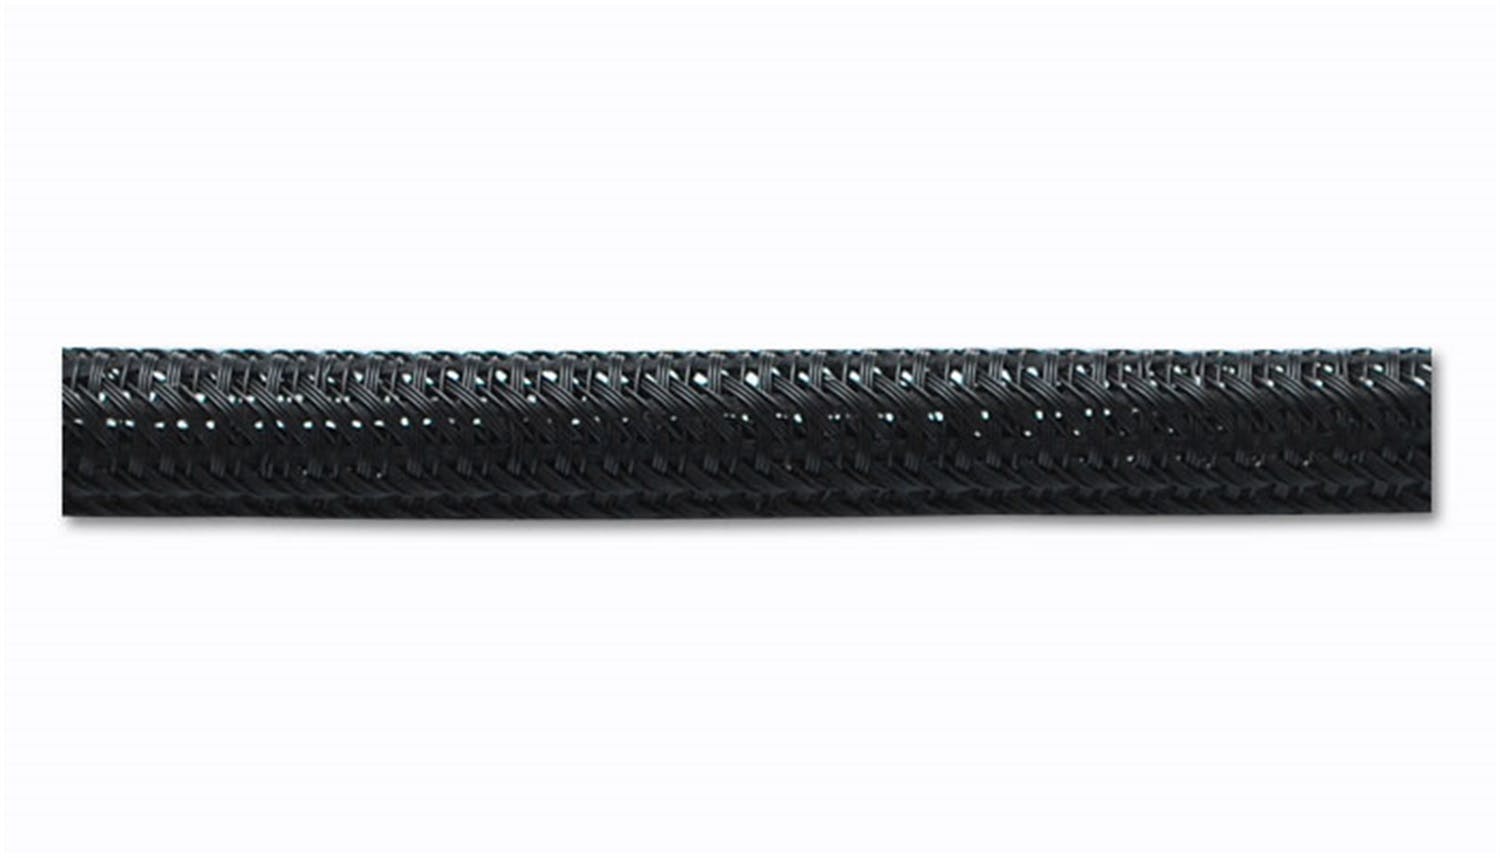 Vibrant Performance 25804 Flexible Split Sleeving, Size: 1 inch (5 foot length) - Black only